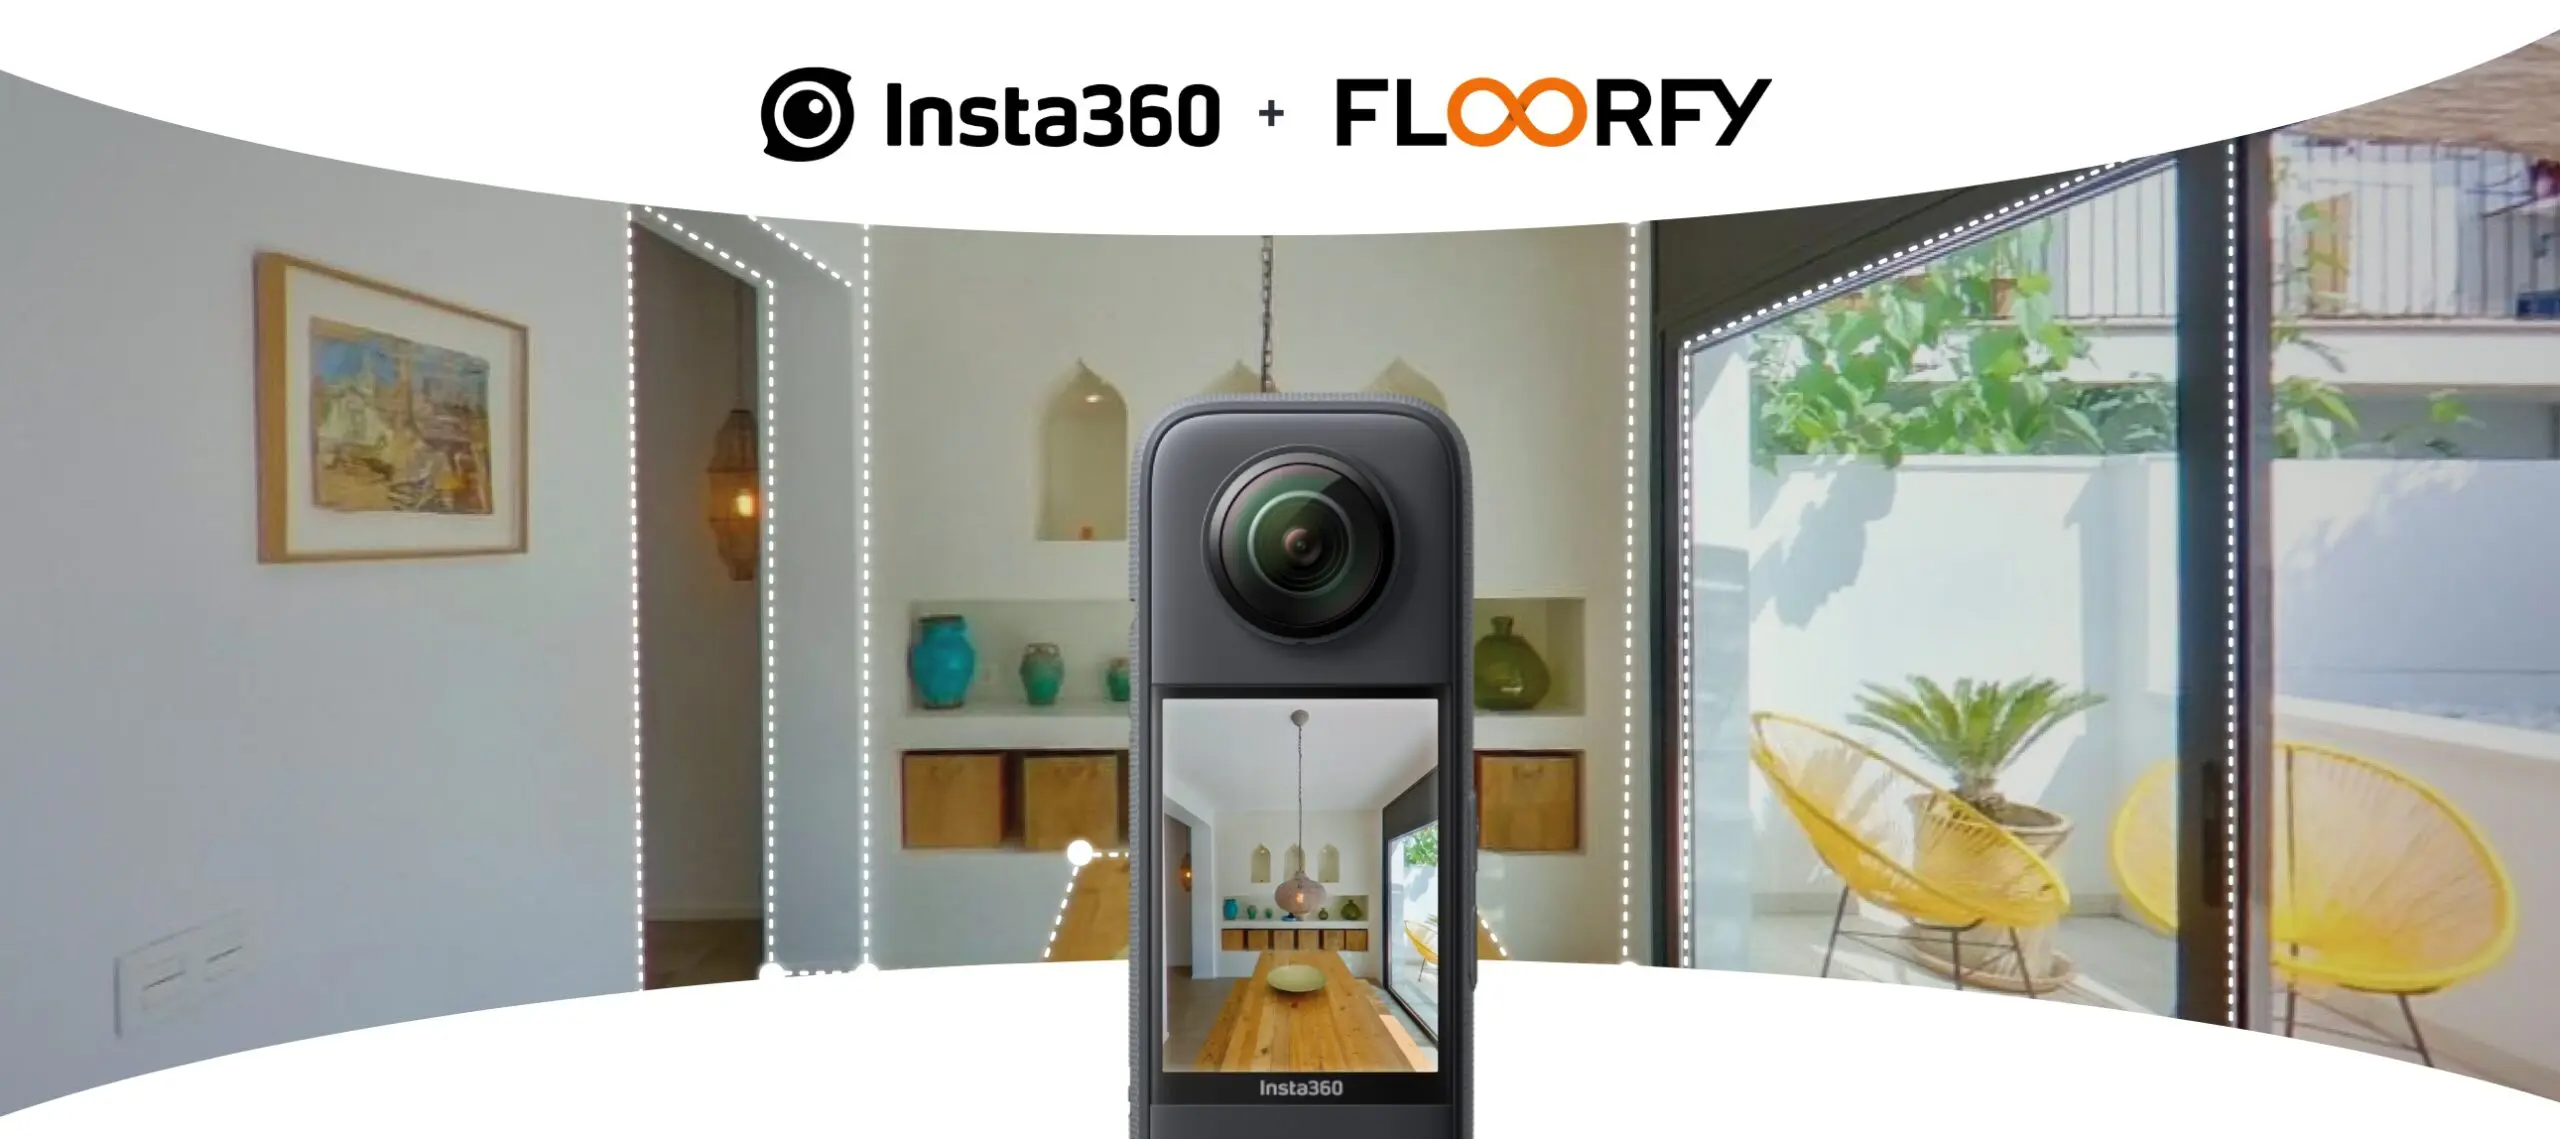 Insta360 Partners With Floorfy - Creating Powerful 360 Virtual Tours